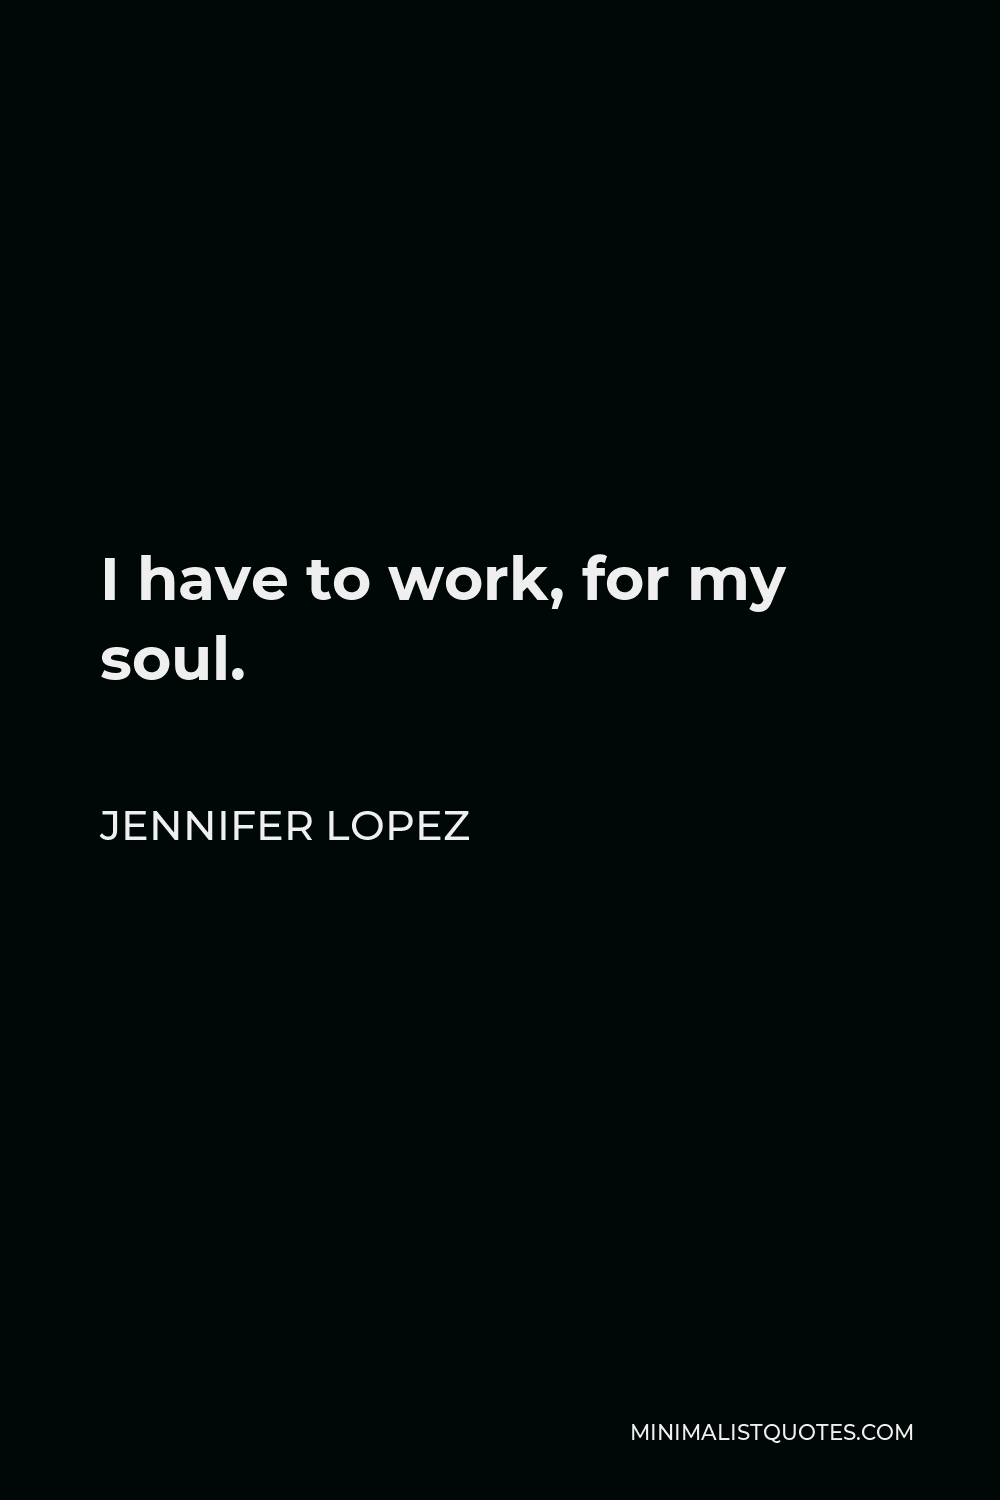 Jennifer Lopez Quote - I have to work, for my soul.